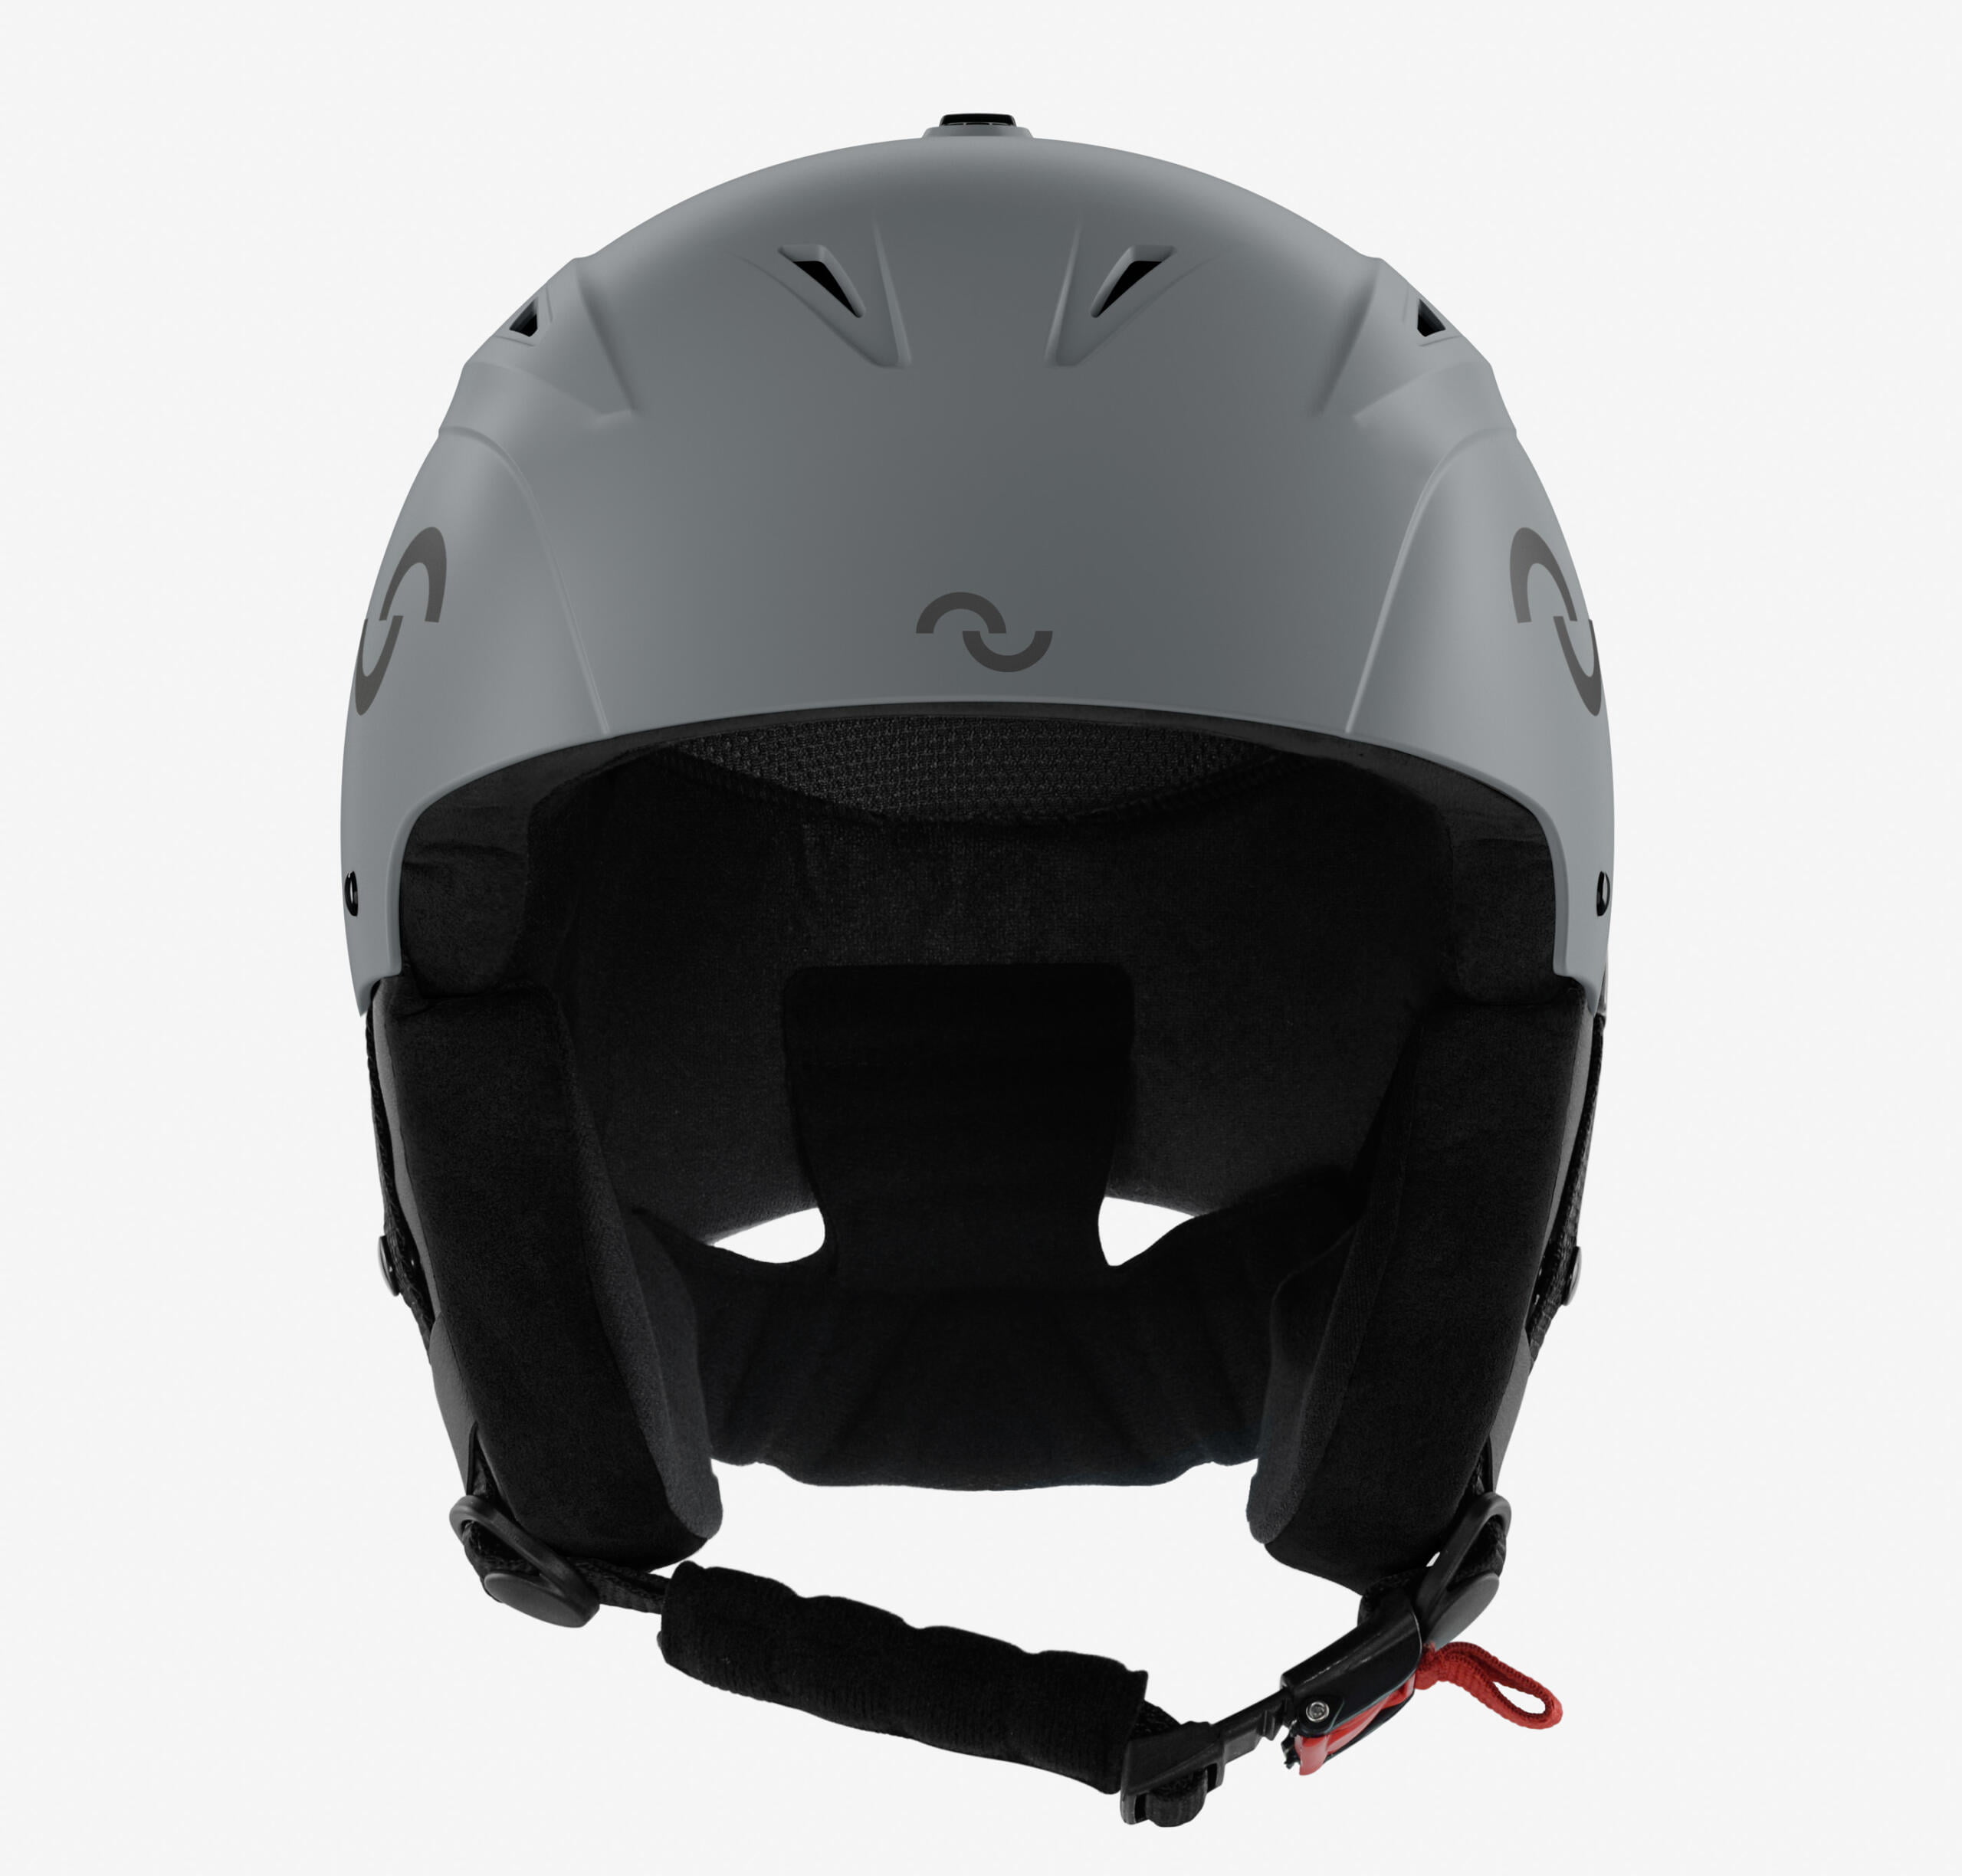 Legend TechMatt ski helmet in grey with a matte finish, showcasing sophisticated elegance, adaptive foam, and an adjustable fit for unparalleled comfort and style.